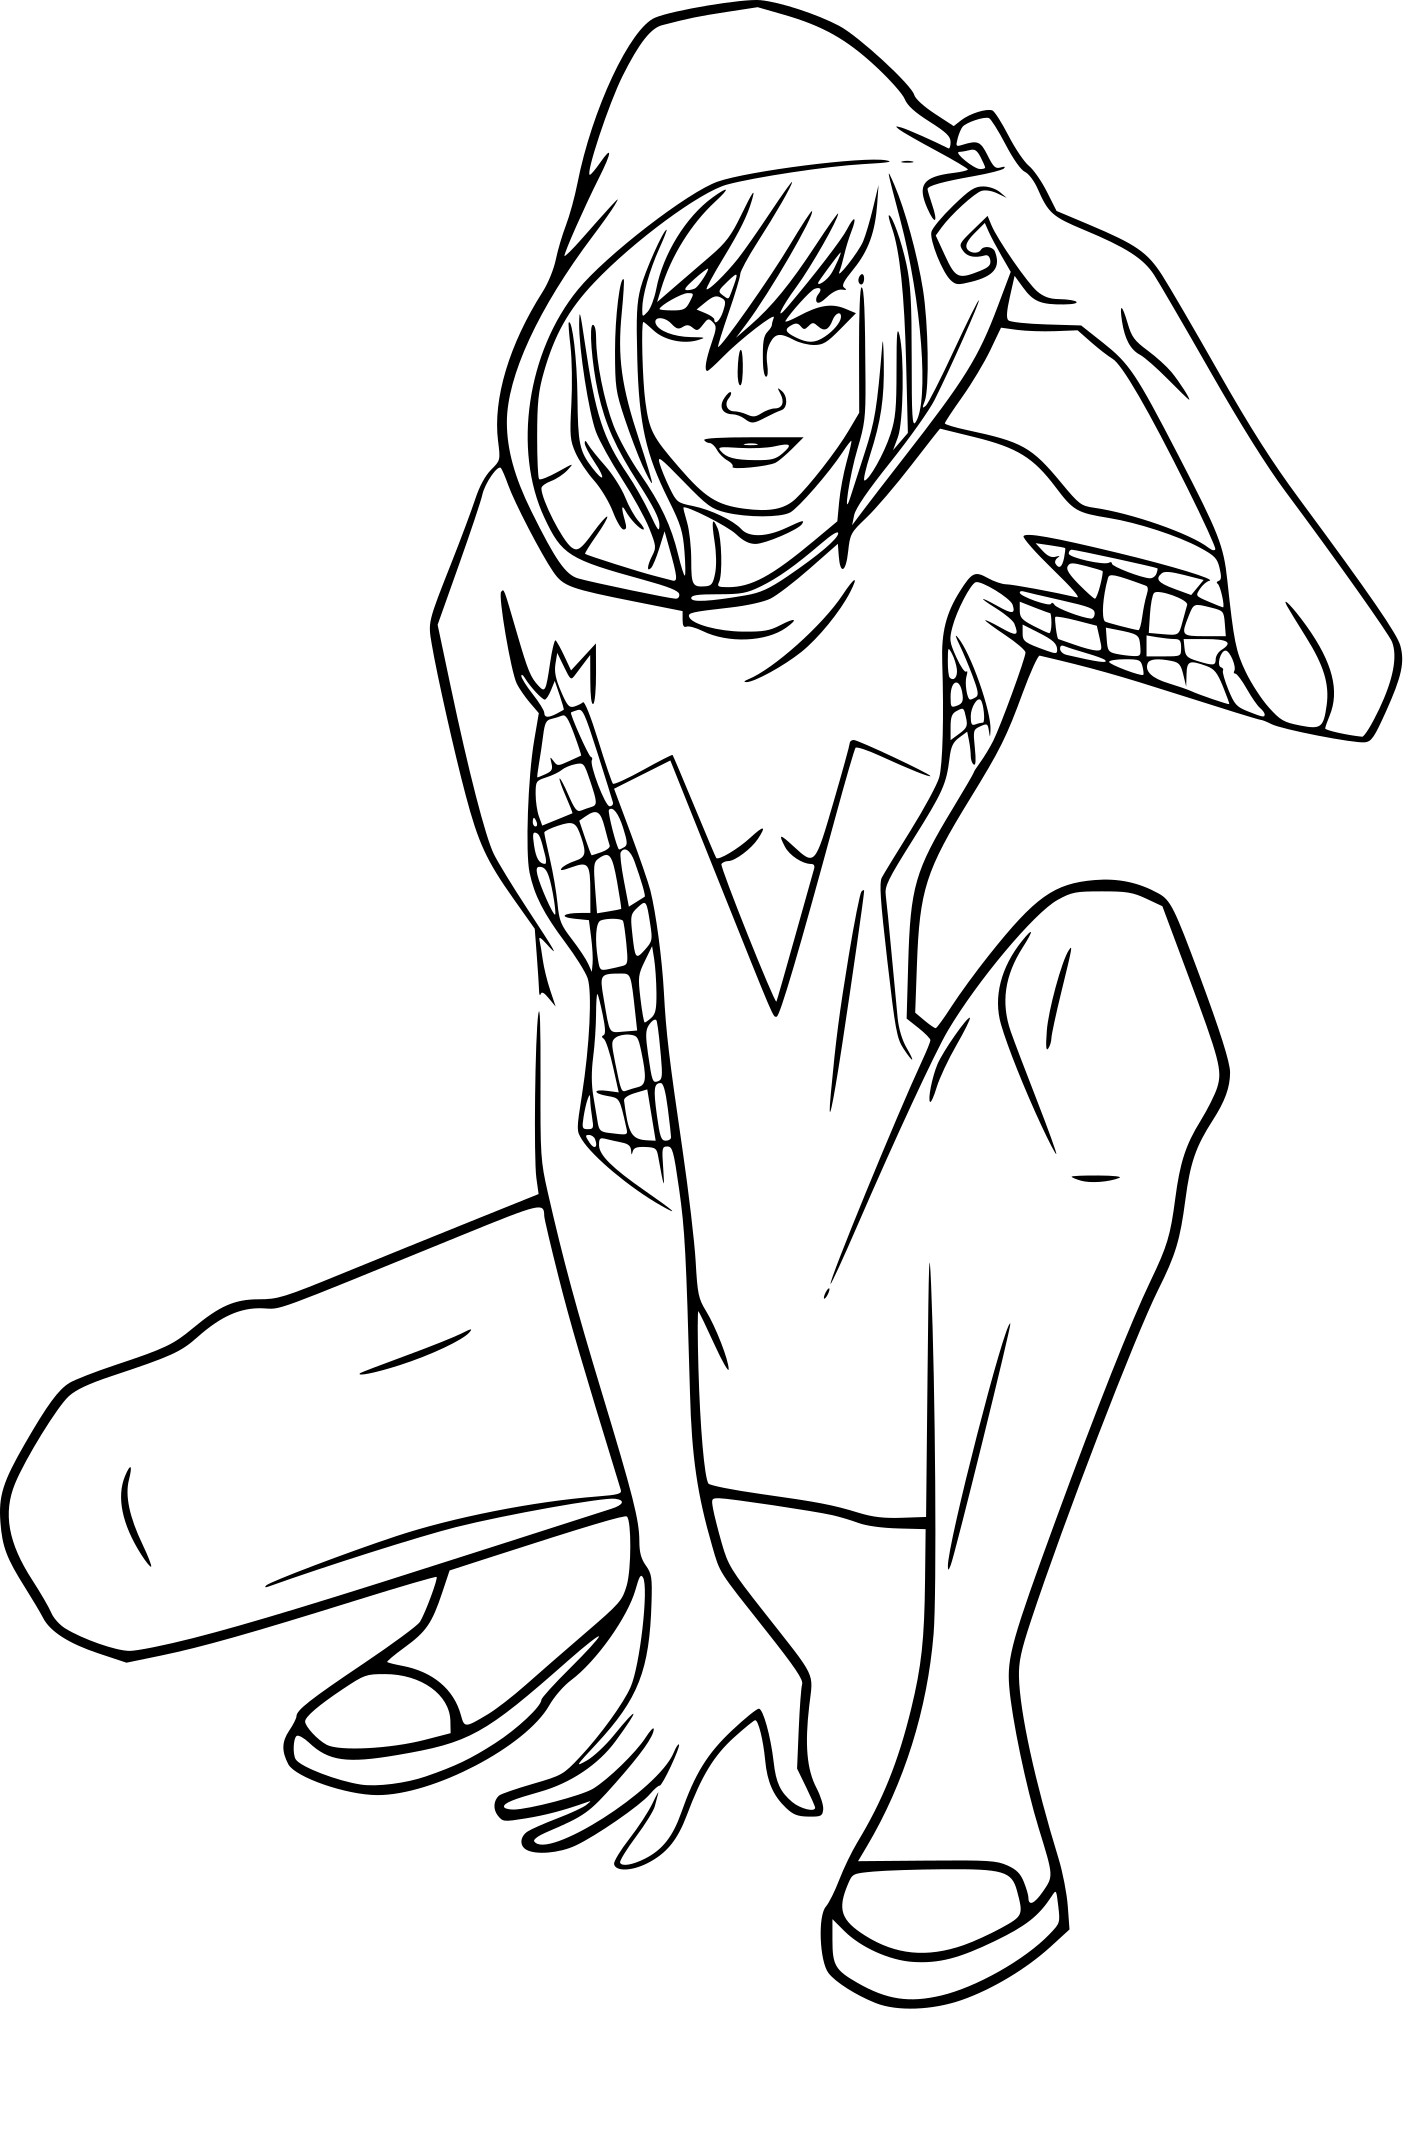 Spider Woman coloring page